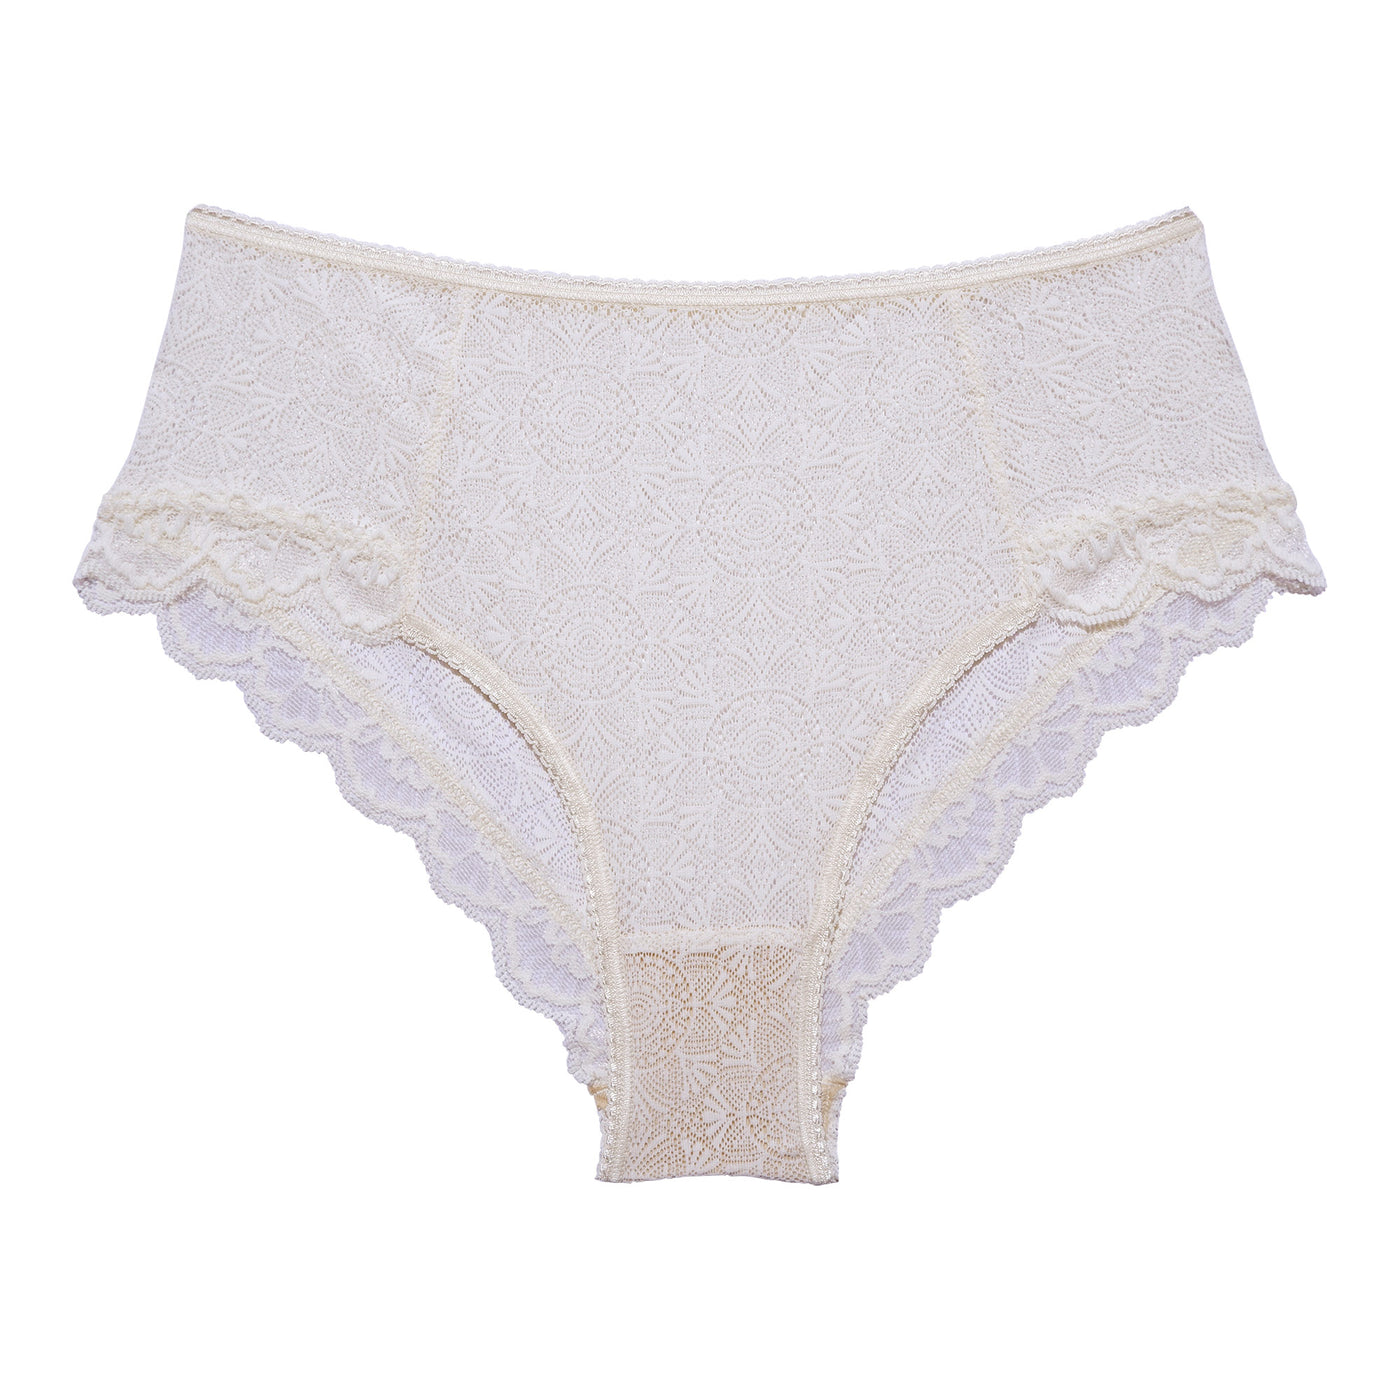 The hipsters are cut in a beautiful lace with a high-rise fit that makes for a slightly vintage look. Sustainable underwear.